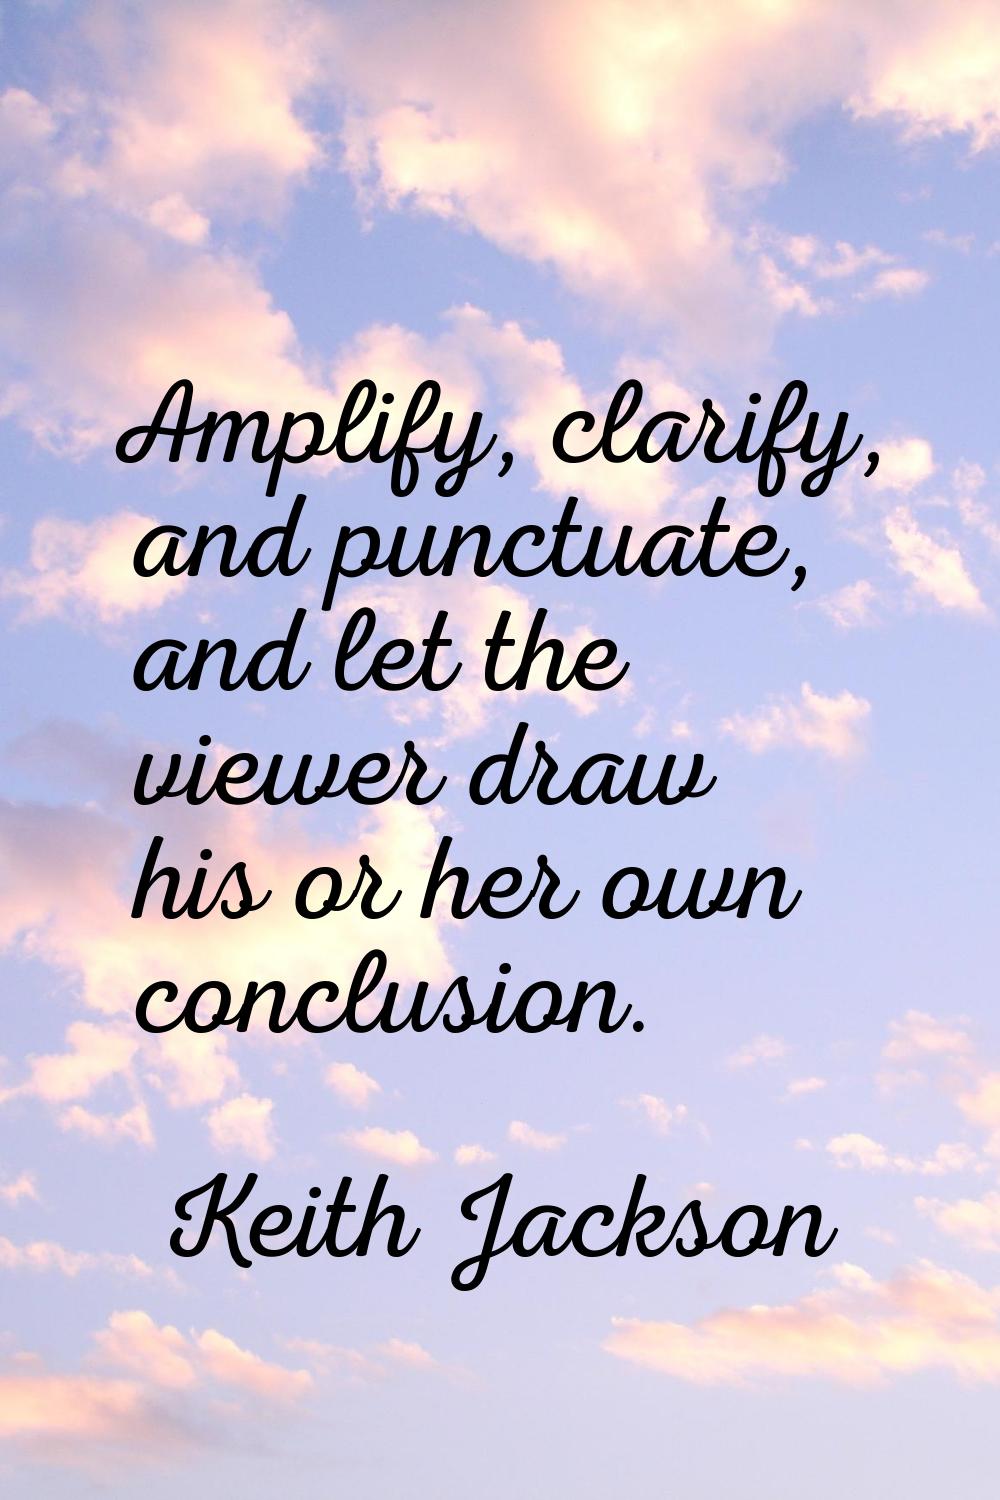 Amplify, clarify, and punctuate, and let the viewer draw his or her own conclusion.